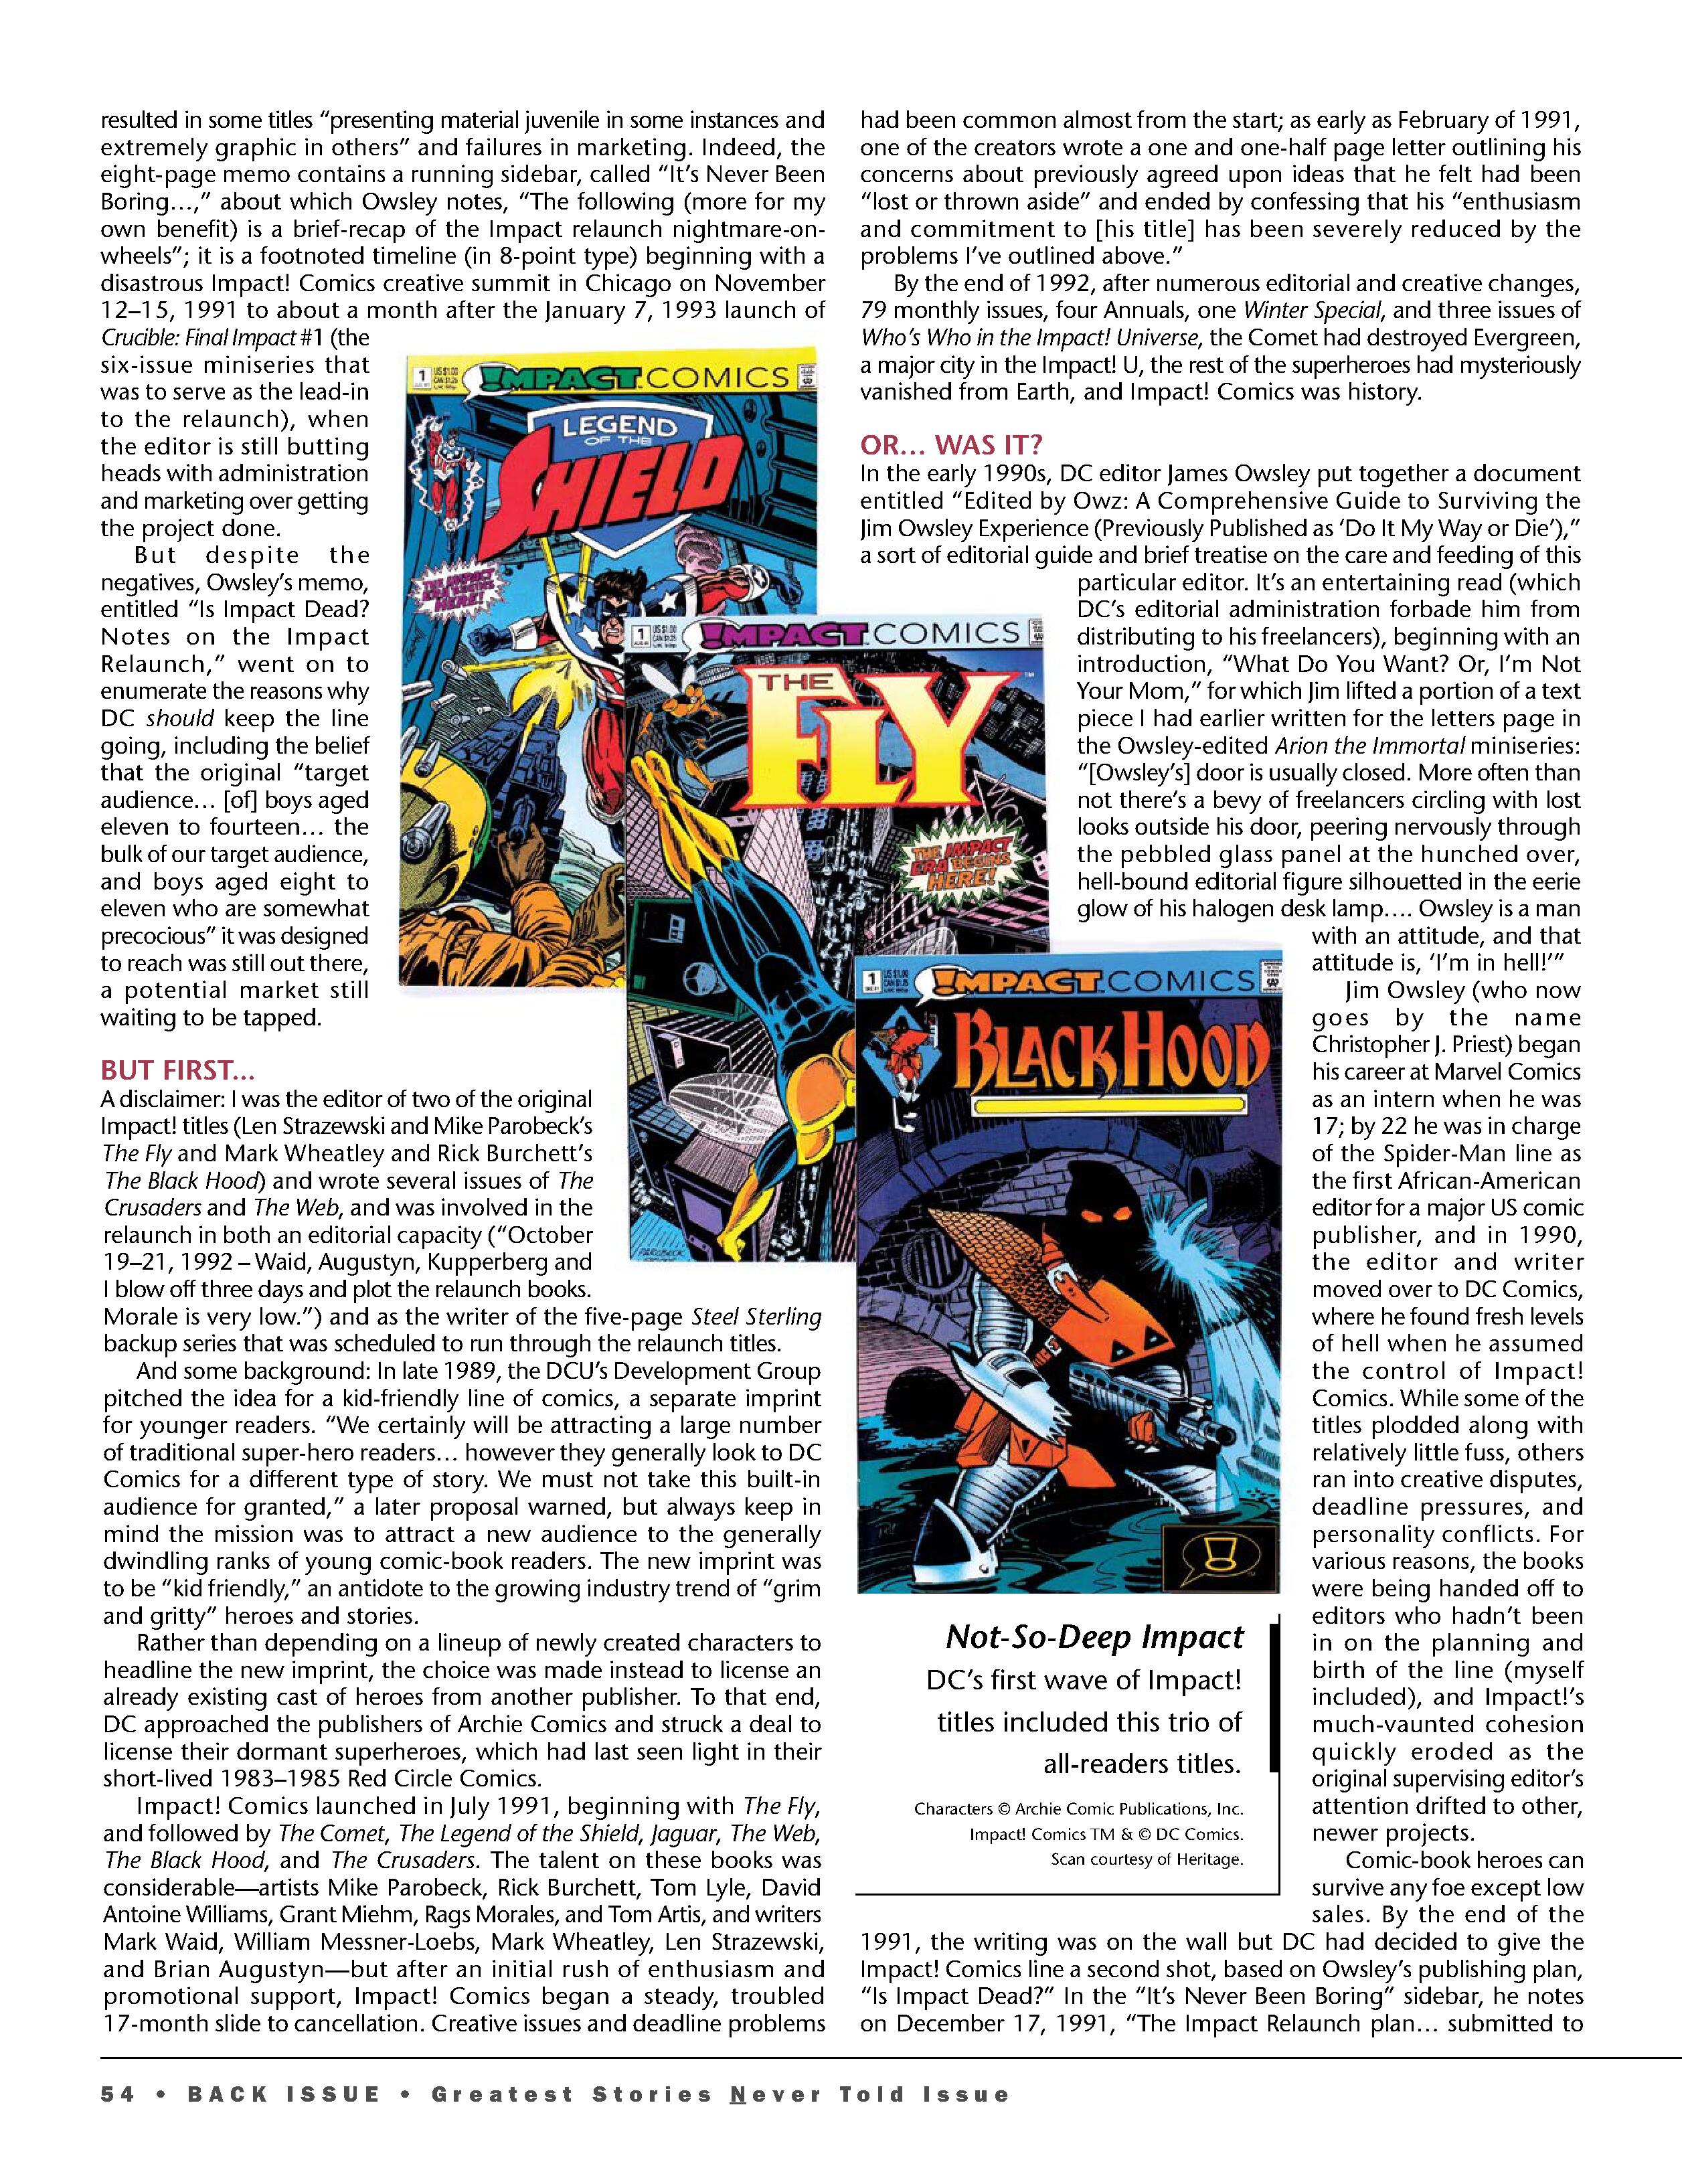 Read online Back Issue comic -  Issue #118 - 56